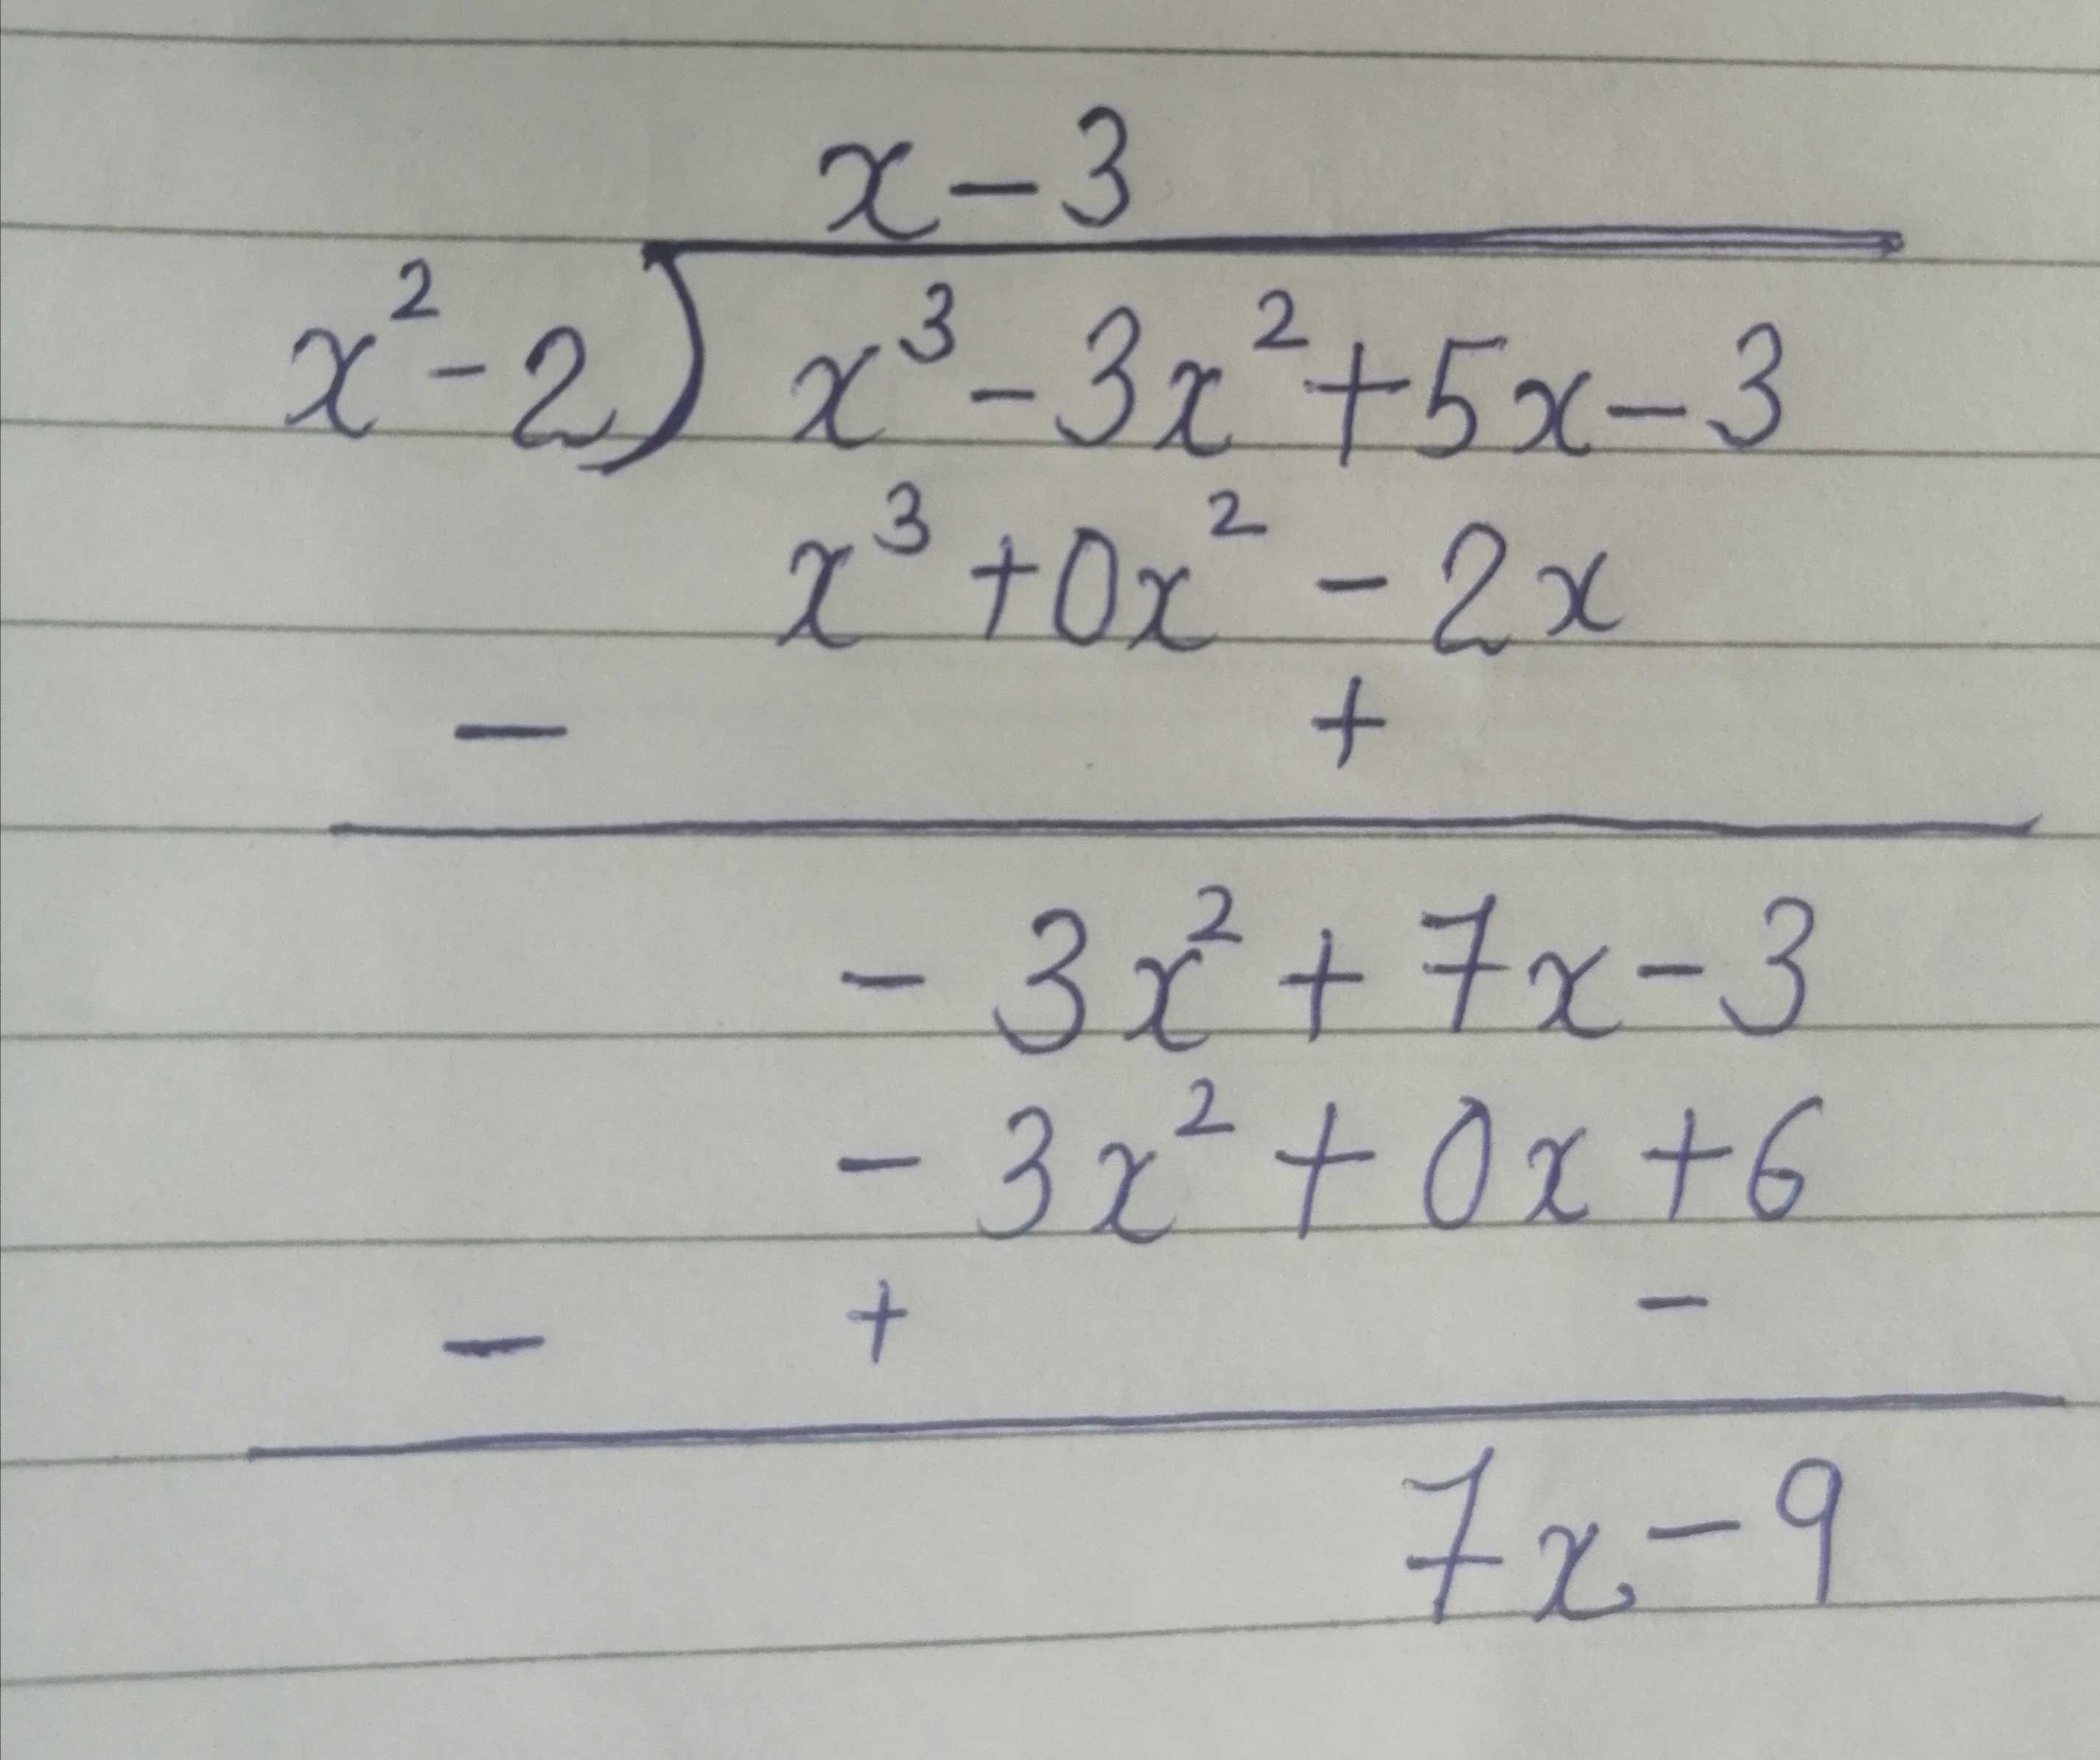 If P X X3 3x2 5x 3 And G X X2 2 Find Remainder Mathematics Topperlearning Com T7tfrb44